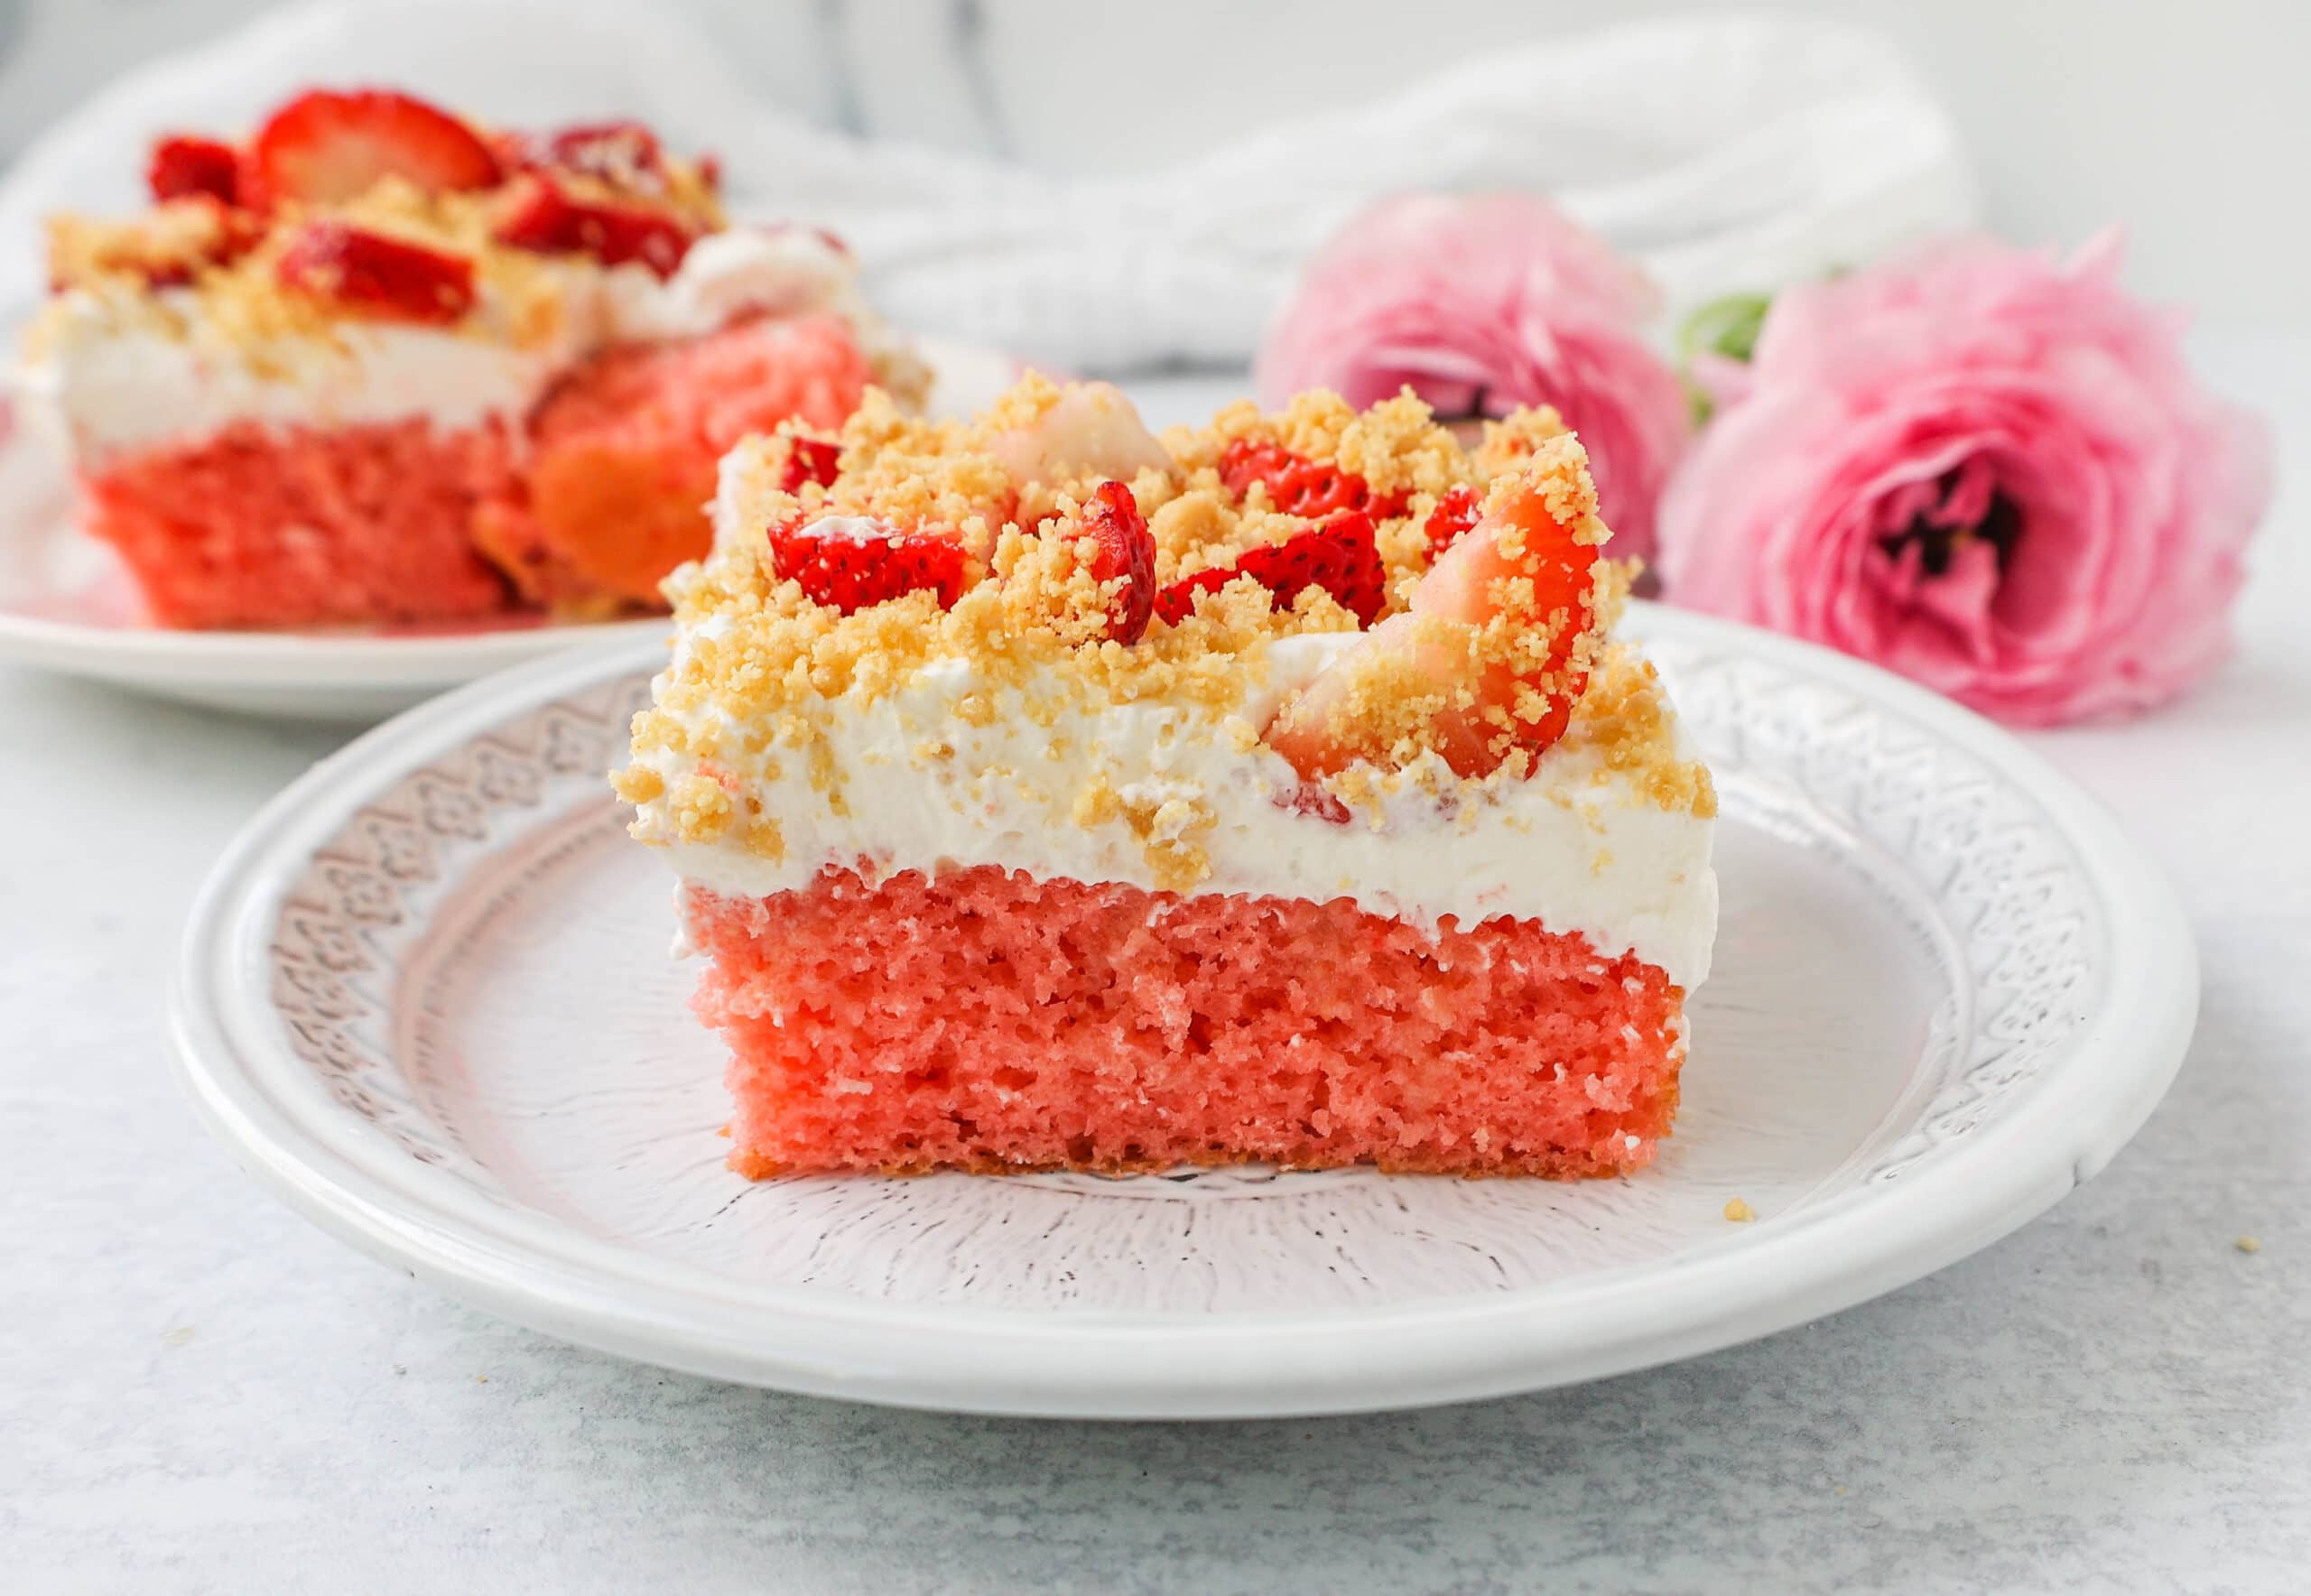 This Strawberry Cream Crunch Cake is a strawberry cake soaked with sweetened condensed milk after baking and topped with fresh sweet whipped cream, fresh strawberries, and crushed golden Oreos for crunch. This strawberry poke cake has it all!